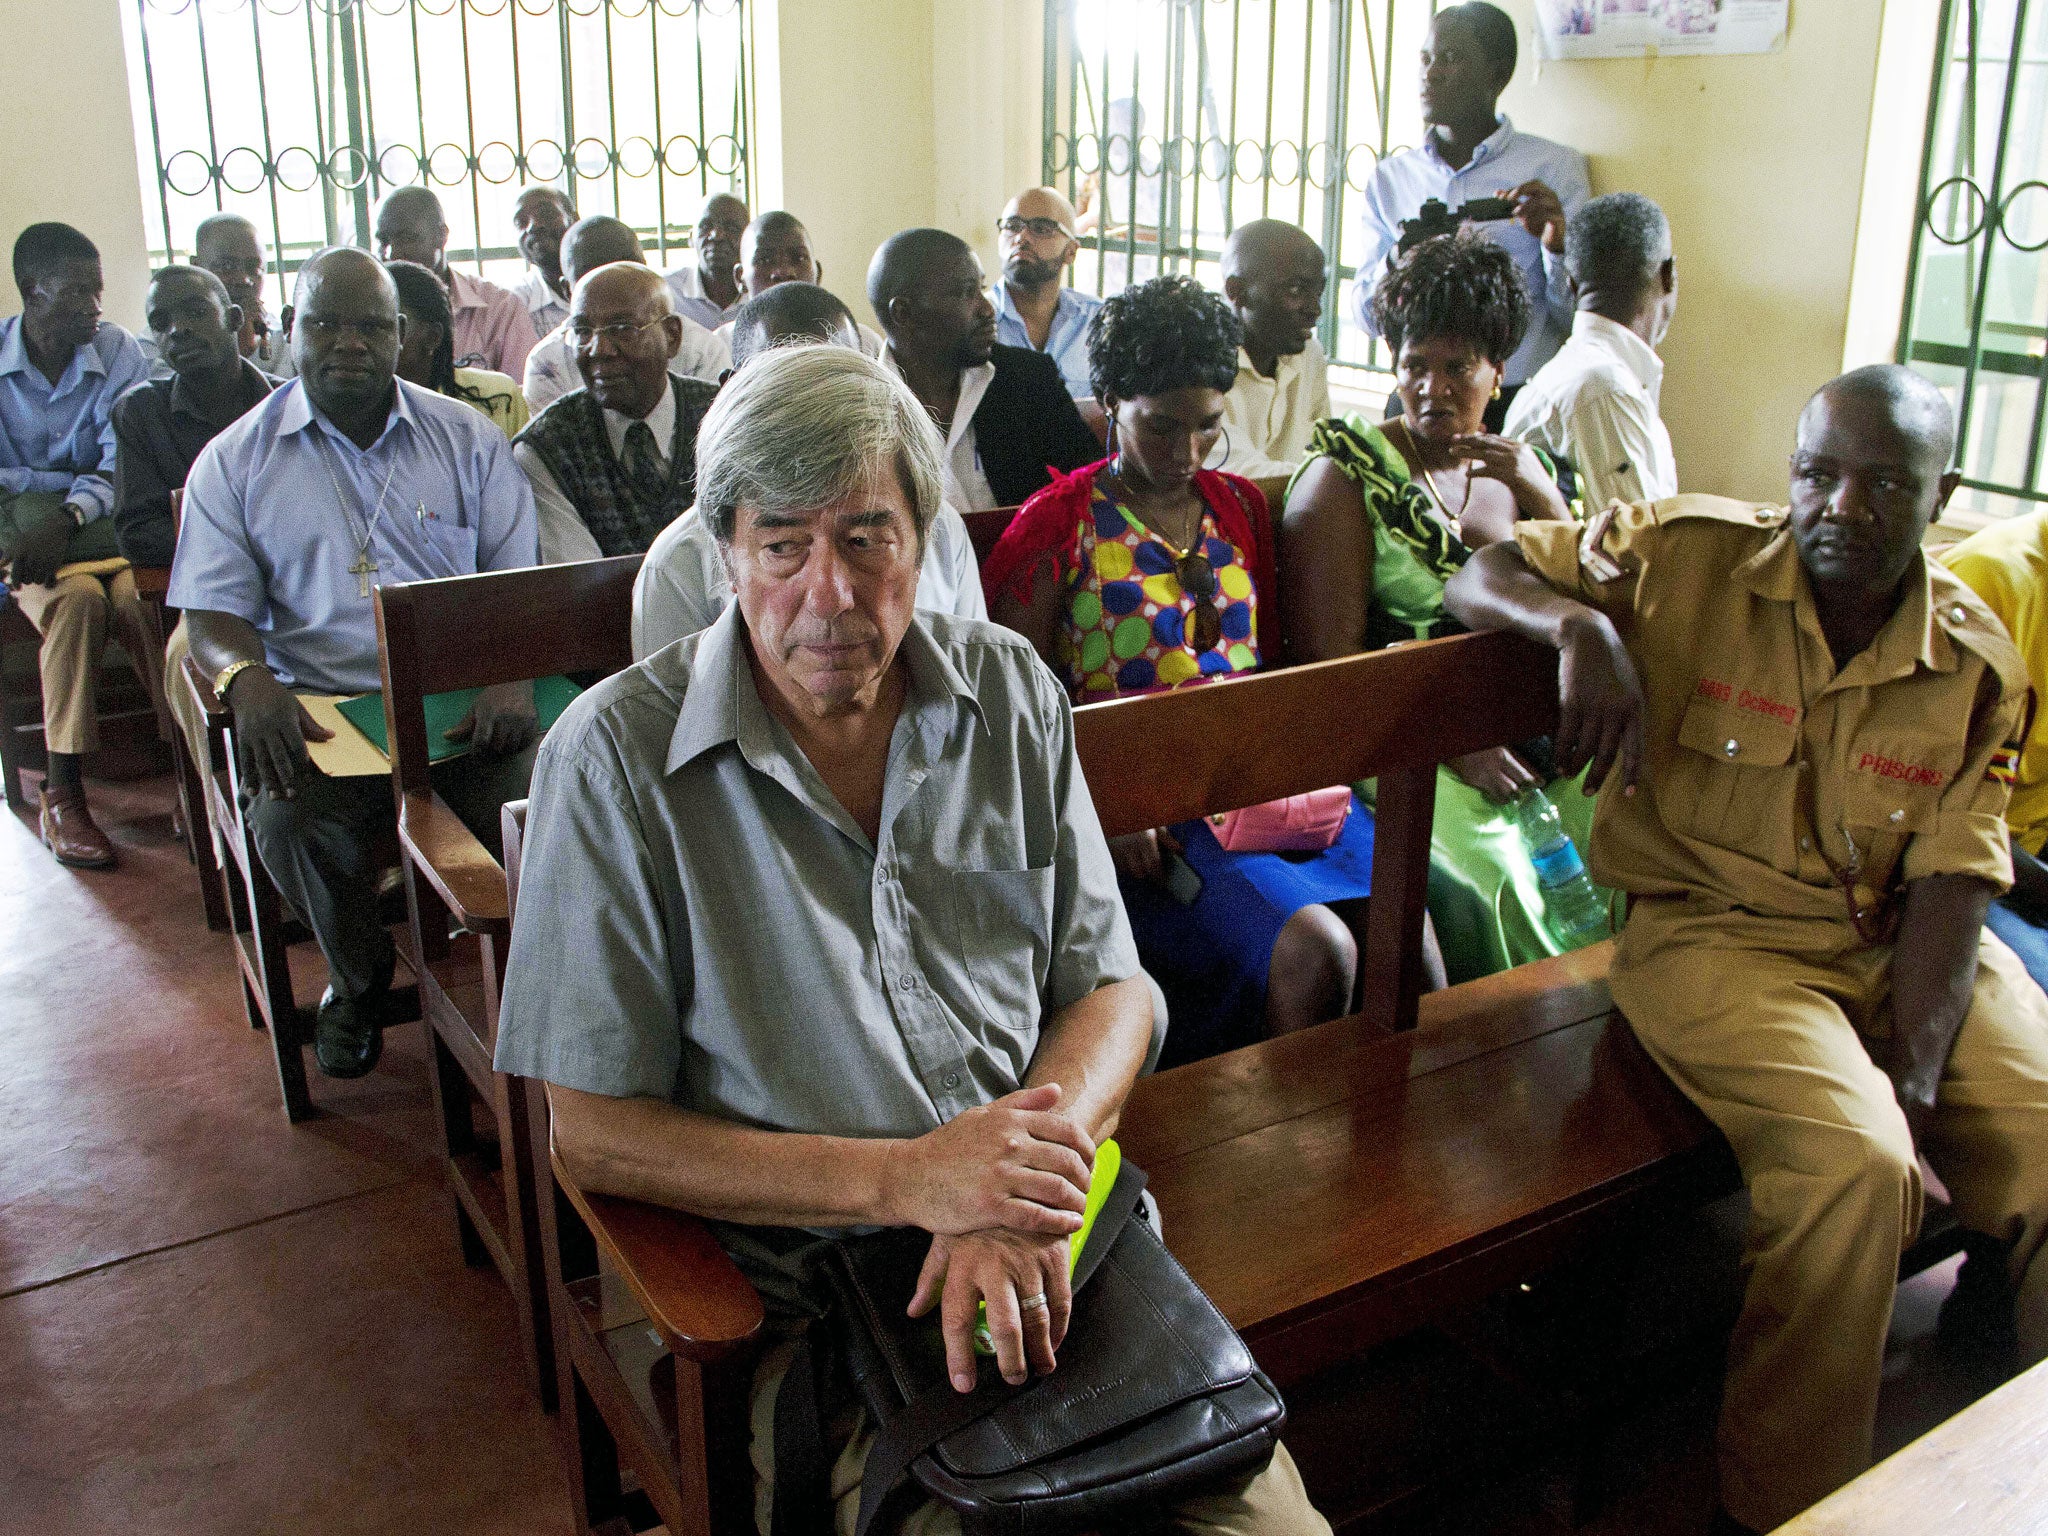 Bernard Randall appears in the Entebbe Chief Magistrates Court on 18 November, on charges of 'trafficking obscene publications'. He was cleared of the charges on Wednesday, and it is thought he will be deported to Britain on Thursday.